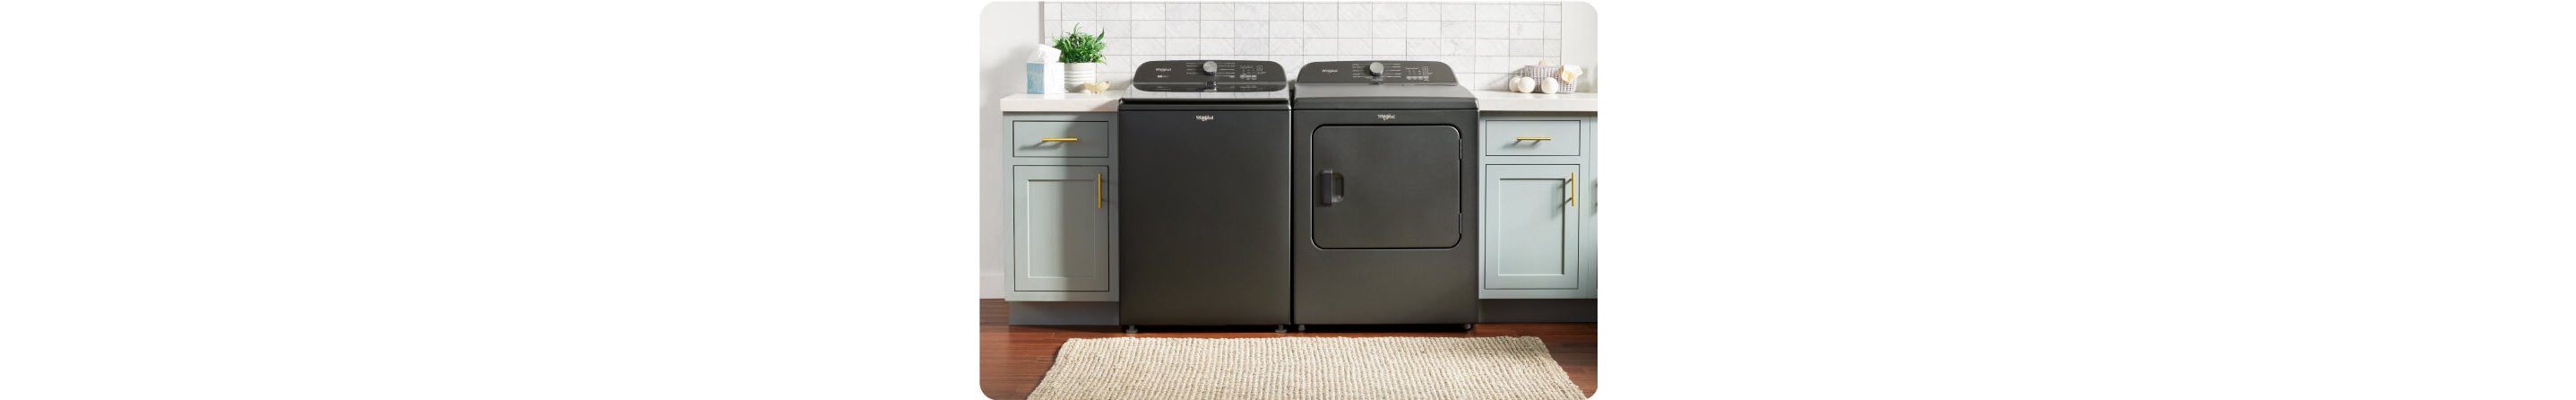 Whirlpool Corp.'s North American washer and dishwasher plants